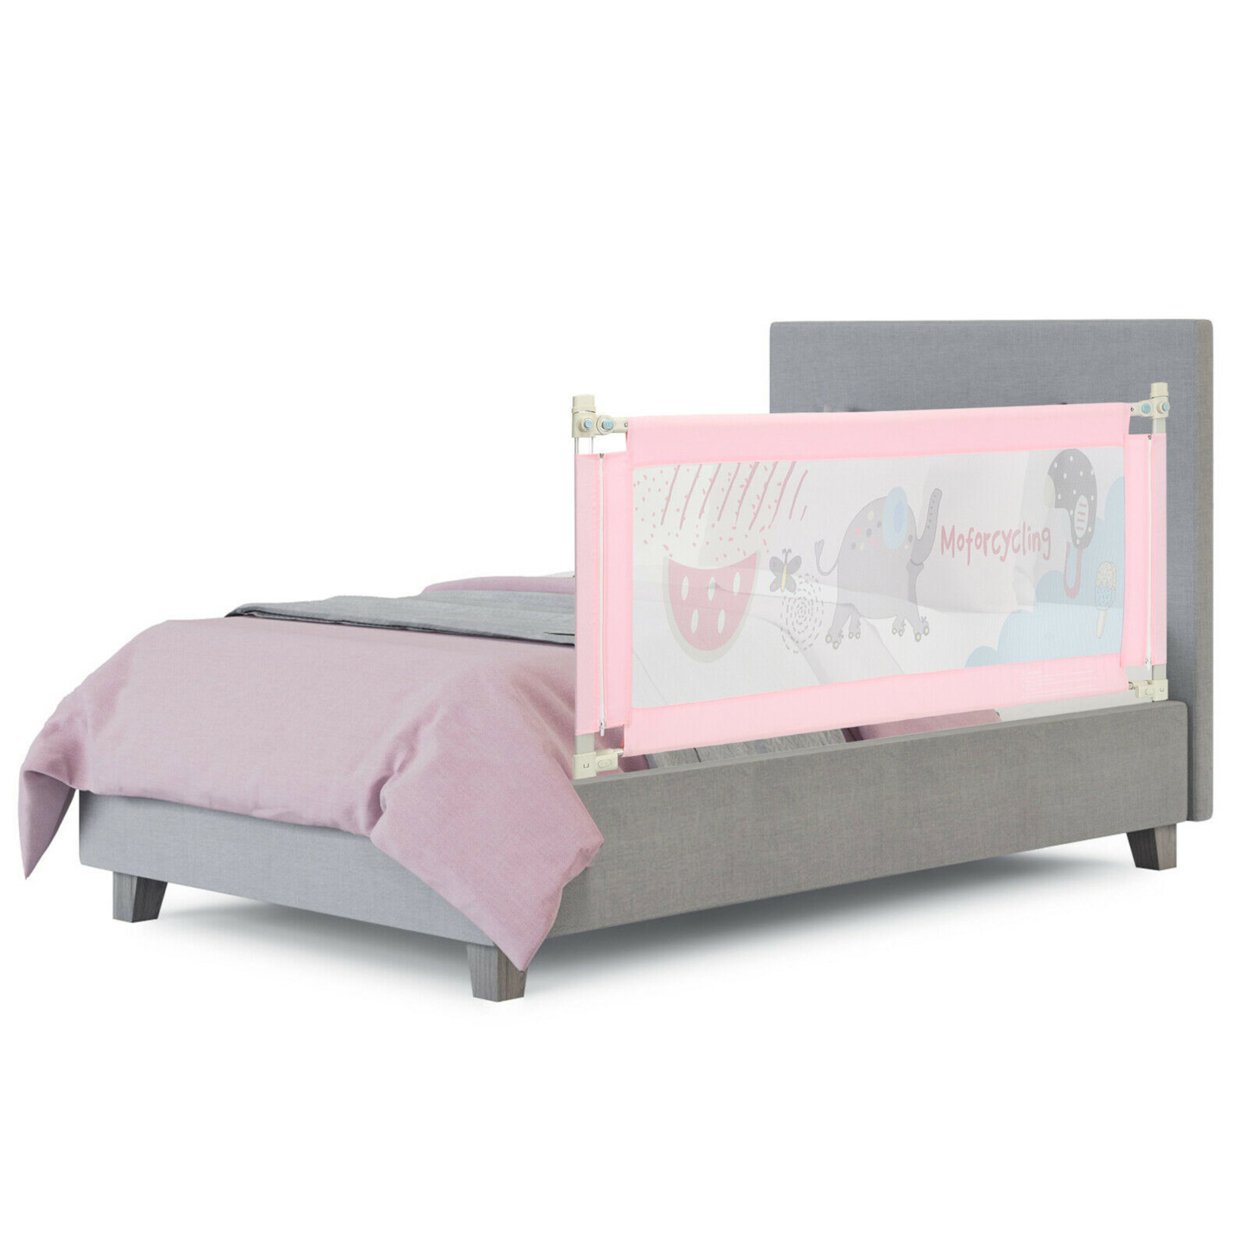 57'' Bed Rails For Toddlers Vertical Lifting Baby Bedrail Guard With Lock Blue / Grey / Pink - Grey